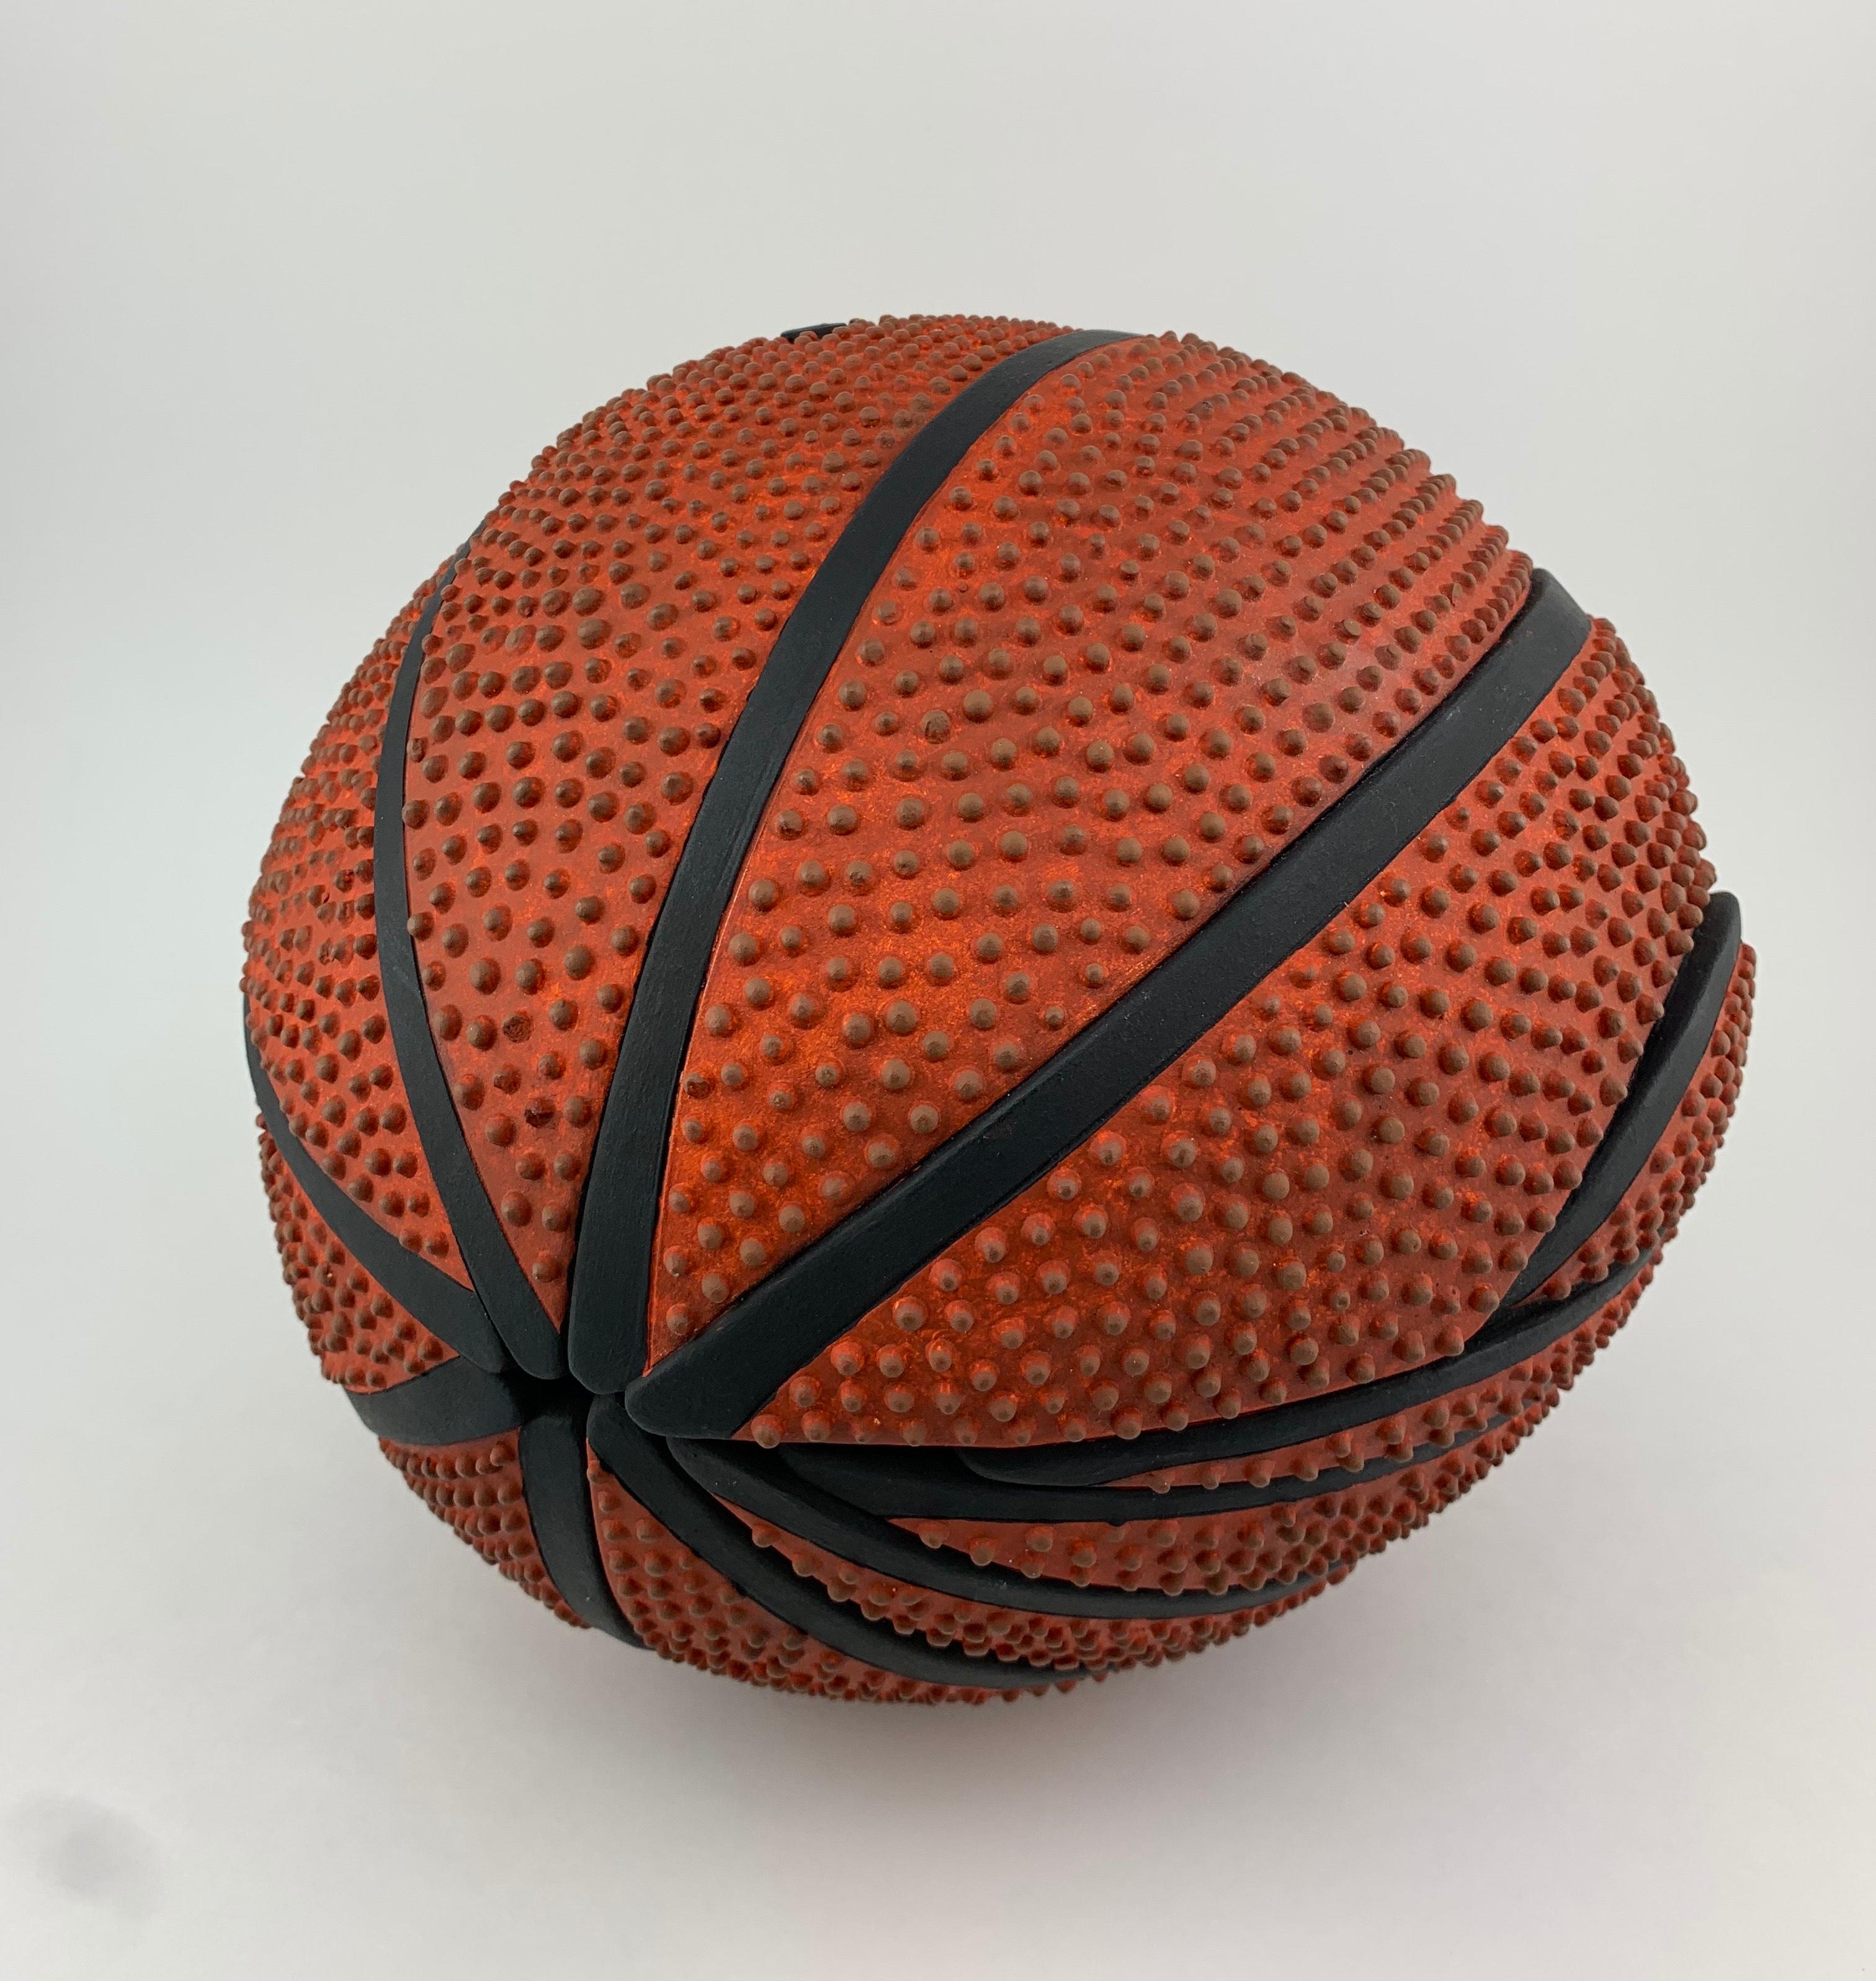 Ryan Michel Still-Life Sculpture - Roly Poly B-Ball, Insect Morphed into Ceramic Basketball Sculpture